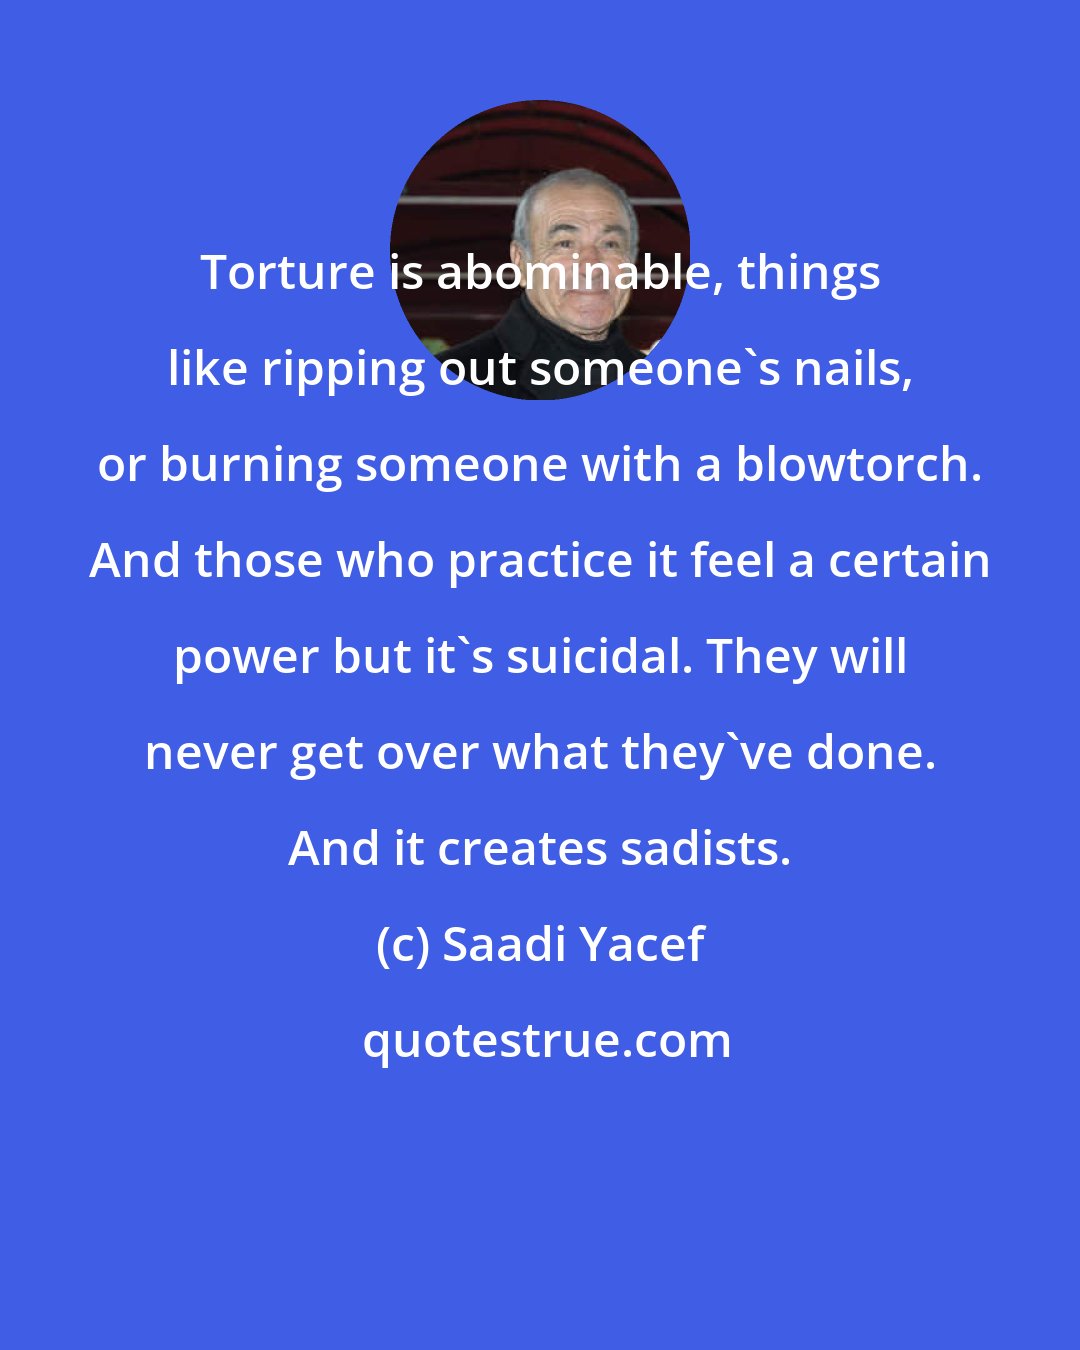 Saadi Yacef: Torture is abominable, things like ripping out someone's nails, or burning someone with a blowtorch. And those who practice it feel a certain power but it's suicidal. They will never get over what they've done. And it creates sadists.